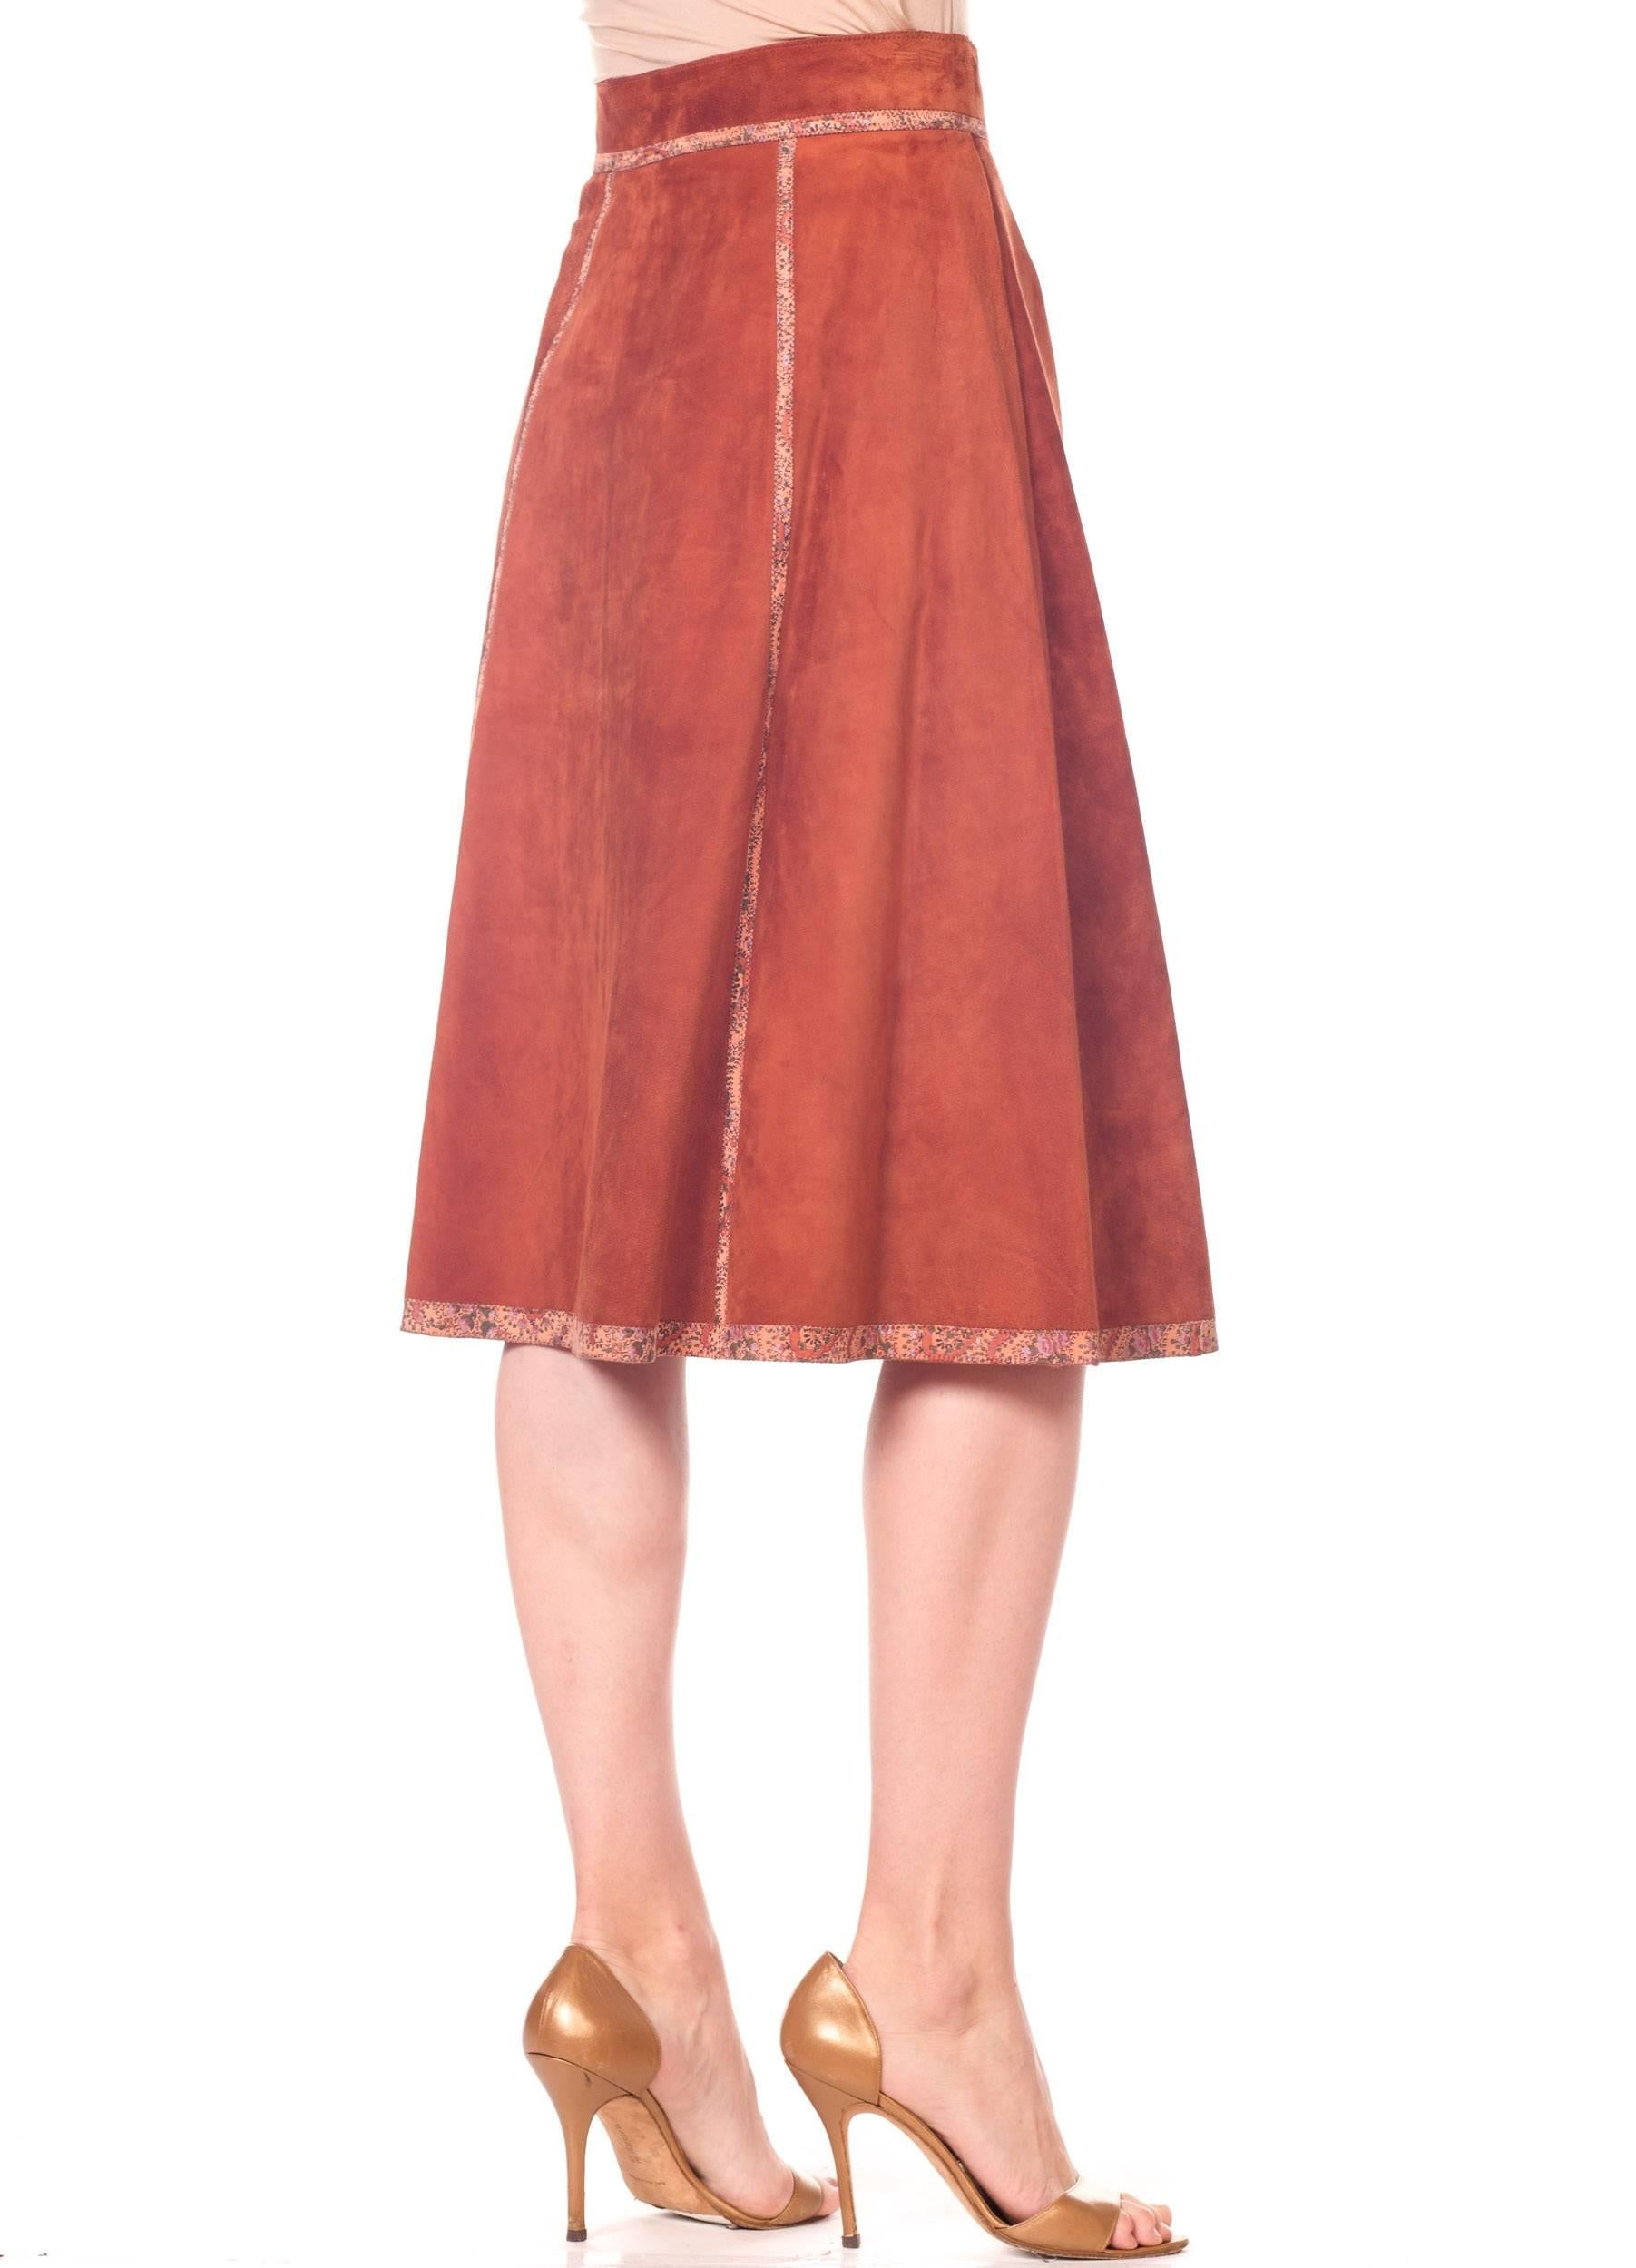 Pink Roberto Cavalli Brown Suede Midi Skirt with Floral Leather Printed Trim 1970s